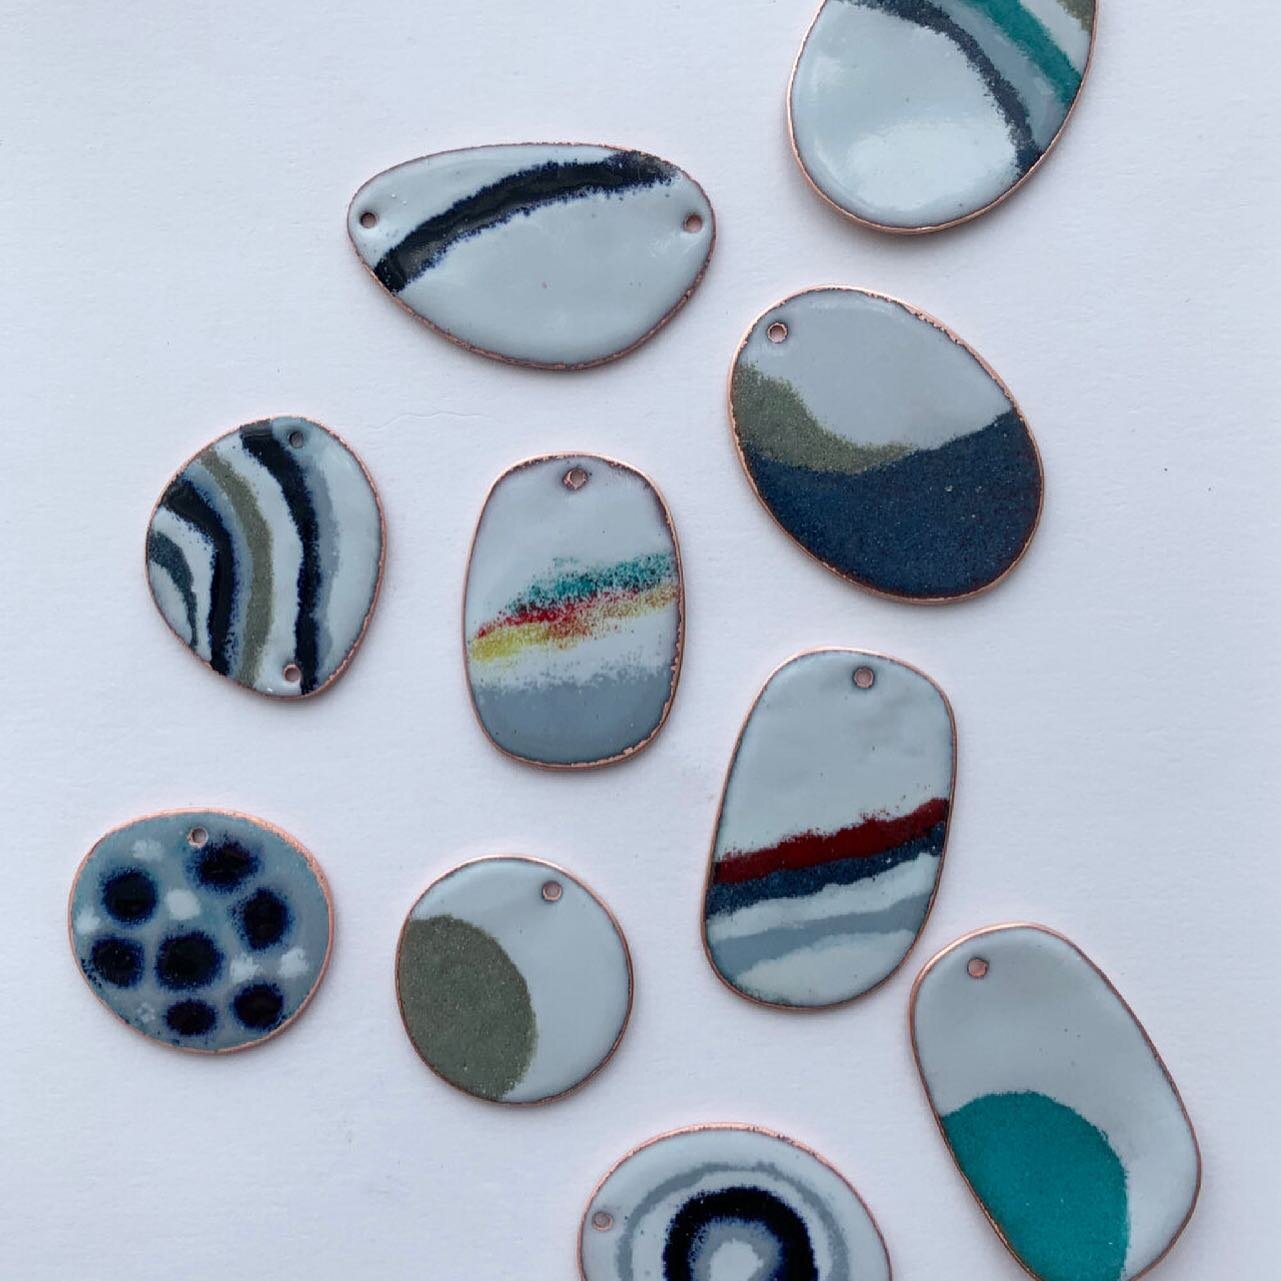 ONE SPACE REMAINING! Sunday 25th July, 10.30am - 4.30pm 🌟🌟🌟
.
We only have one space left on our new enamelling workshop, run by the fantastic silversmith and jeweller @emwilsondesignermaker. In this full day workshop you will learn how to enamel 